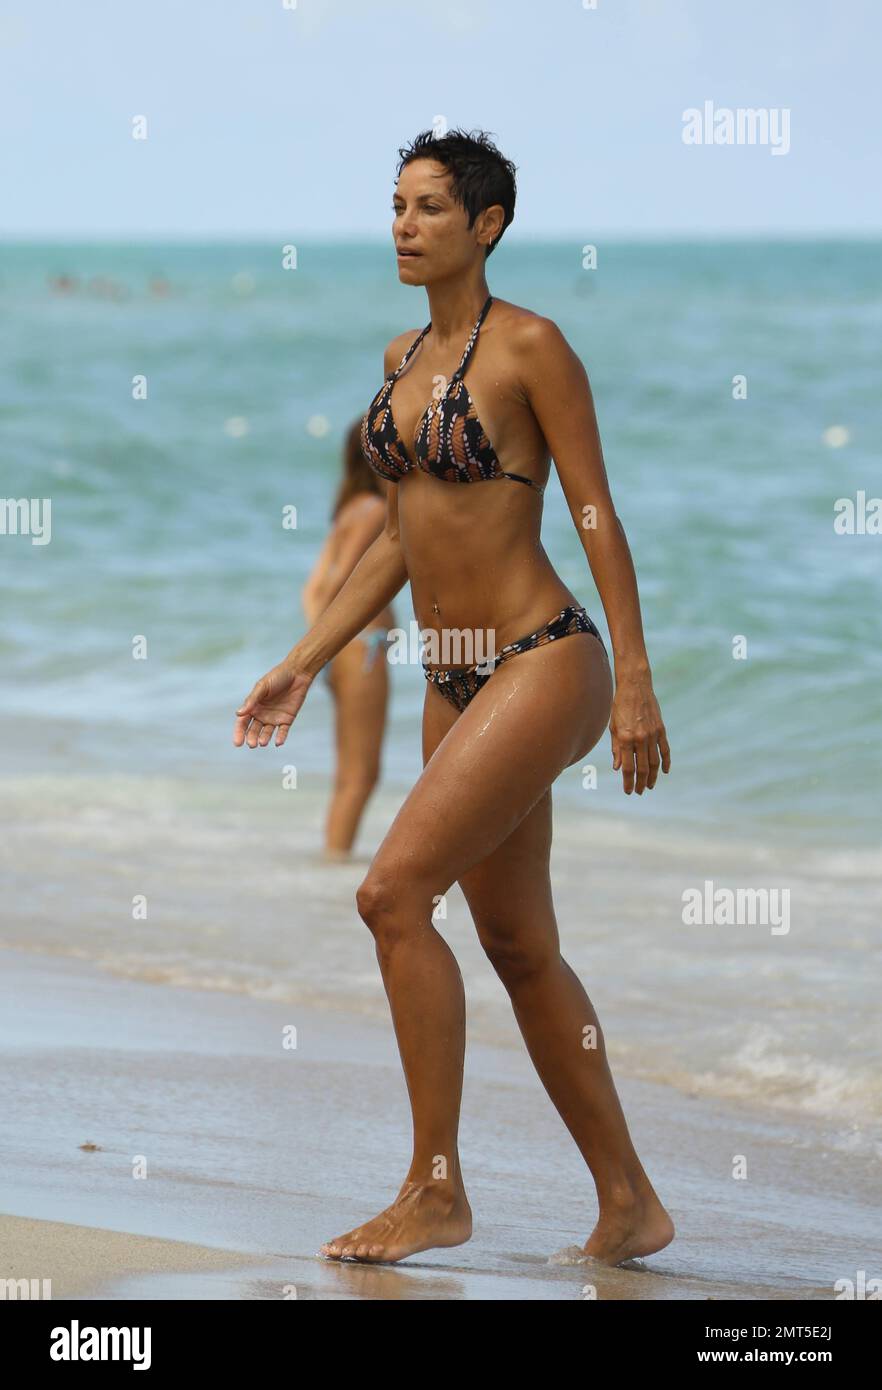 Newly single Nicole Murphy shows off her incredible bikini body during  Labour Day in South Beach. Murphy was accompanied by a tattooed hunk and  female friend. She's been in town promotion her